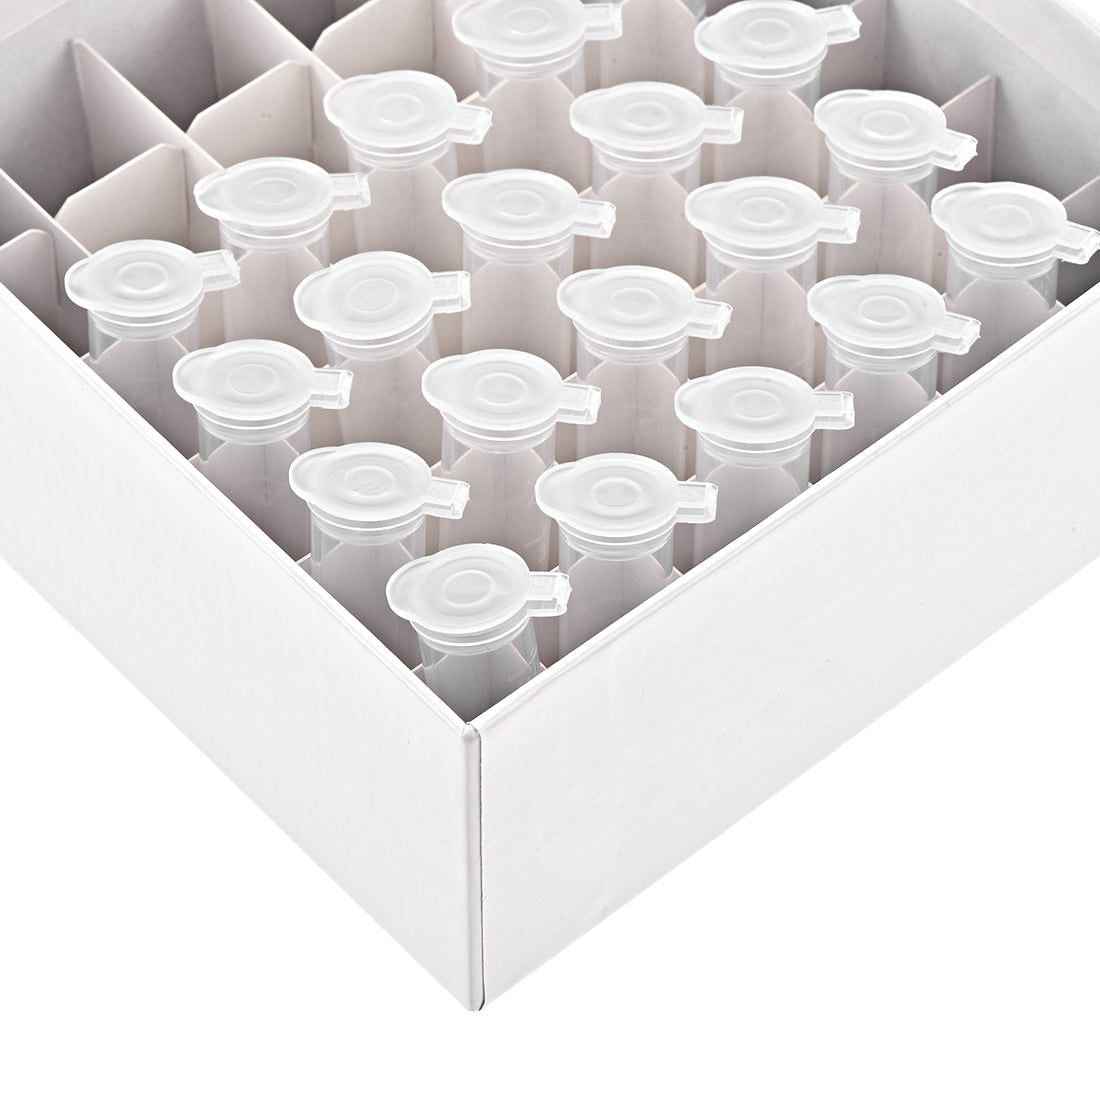 uxcell Uxcell Freezer Tube Box 36 Places Waterproof Cardboard Holder Rack for 5ml Microcentrifuge Tubes